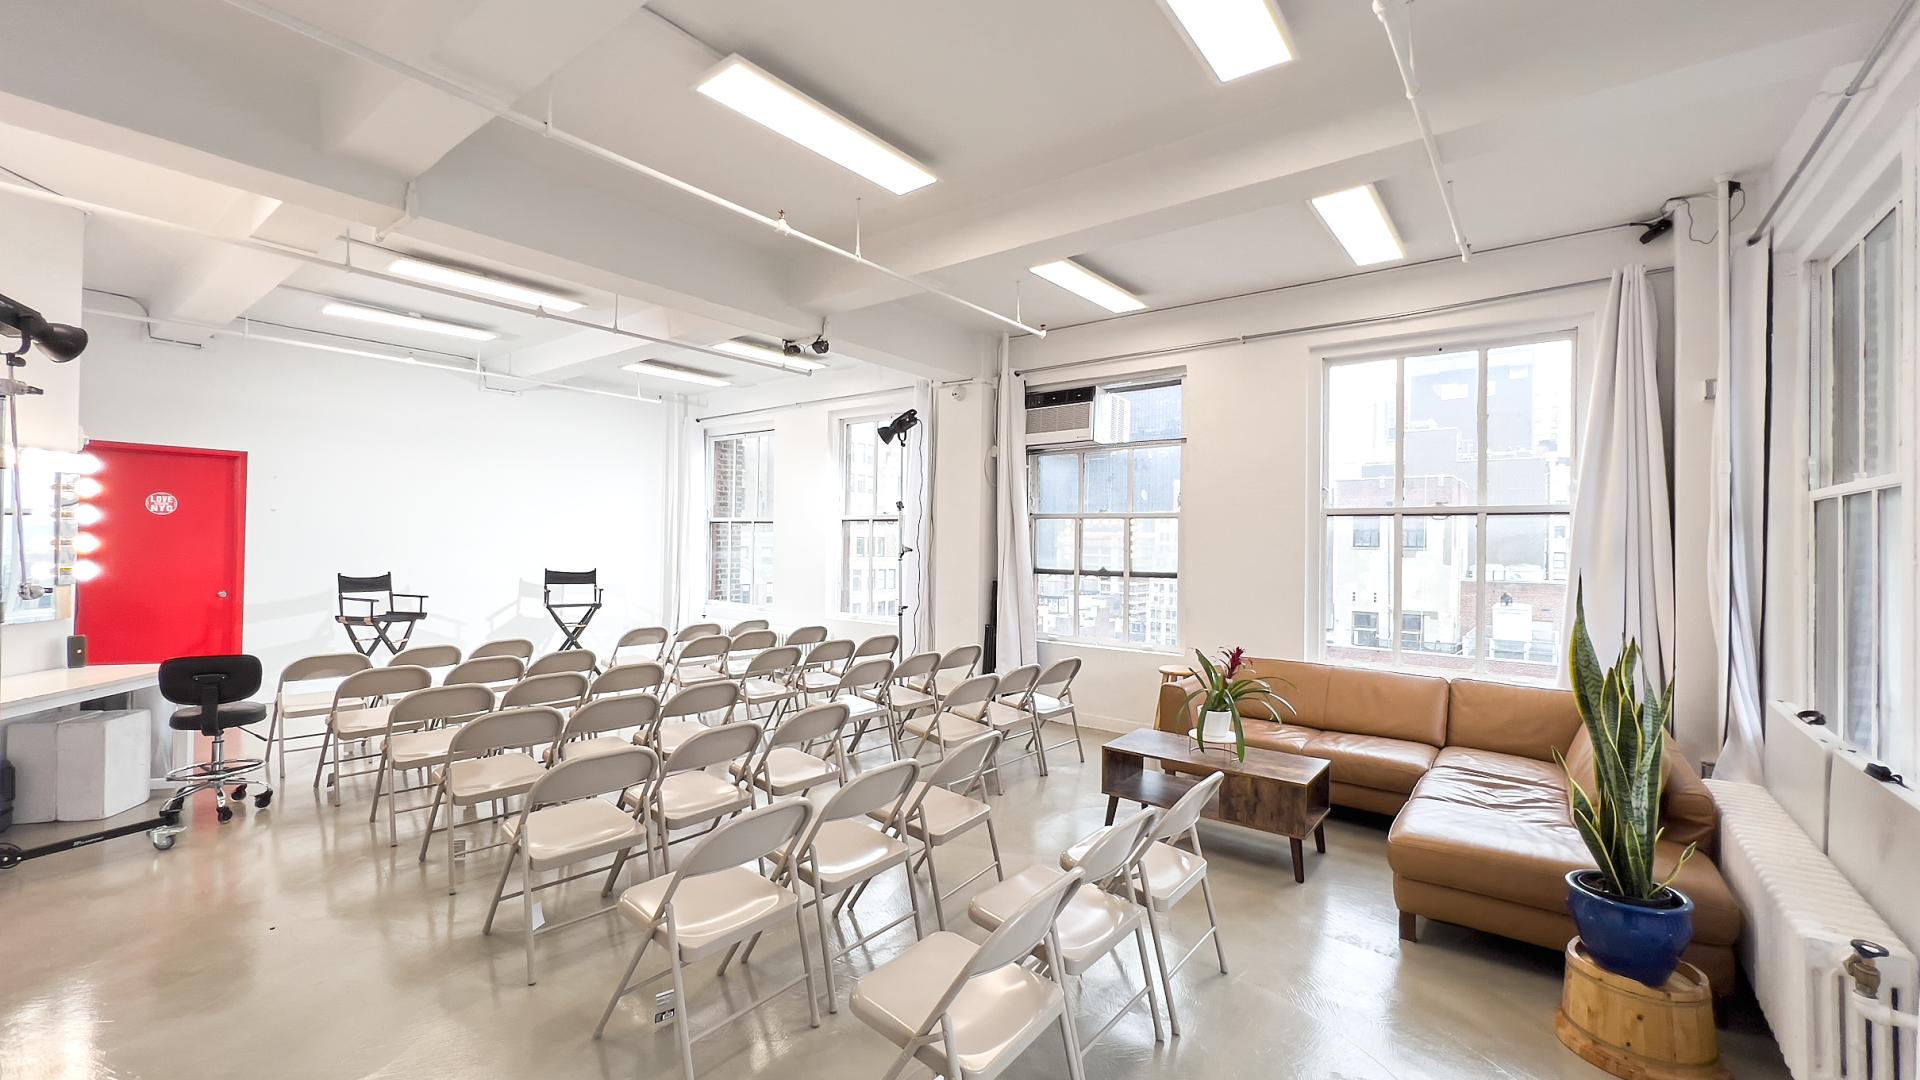 Book Launch Venues for Rent in New York City, NY